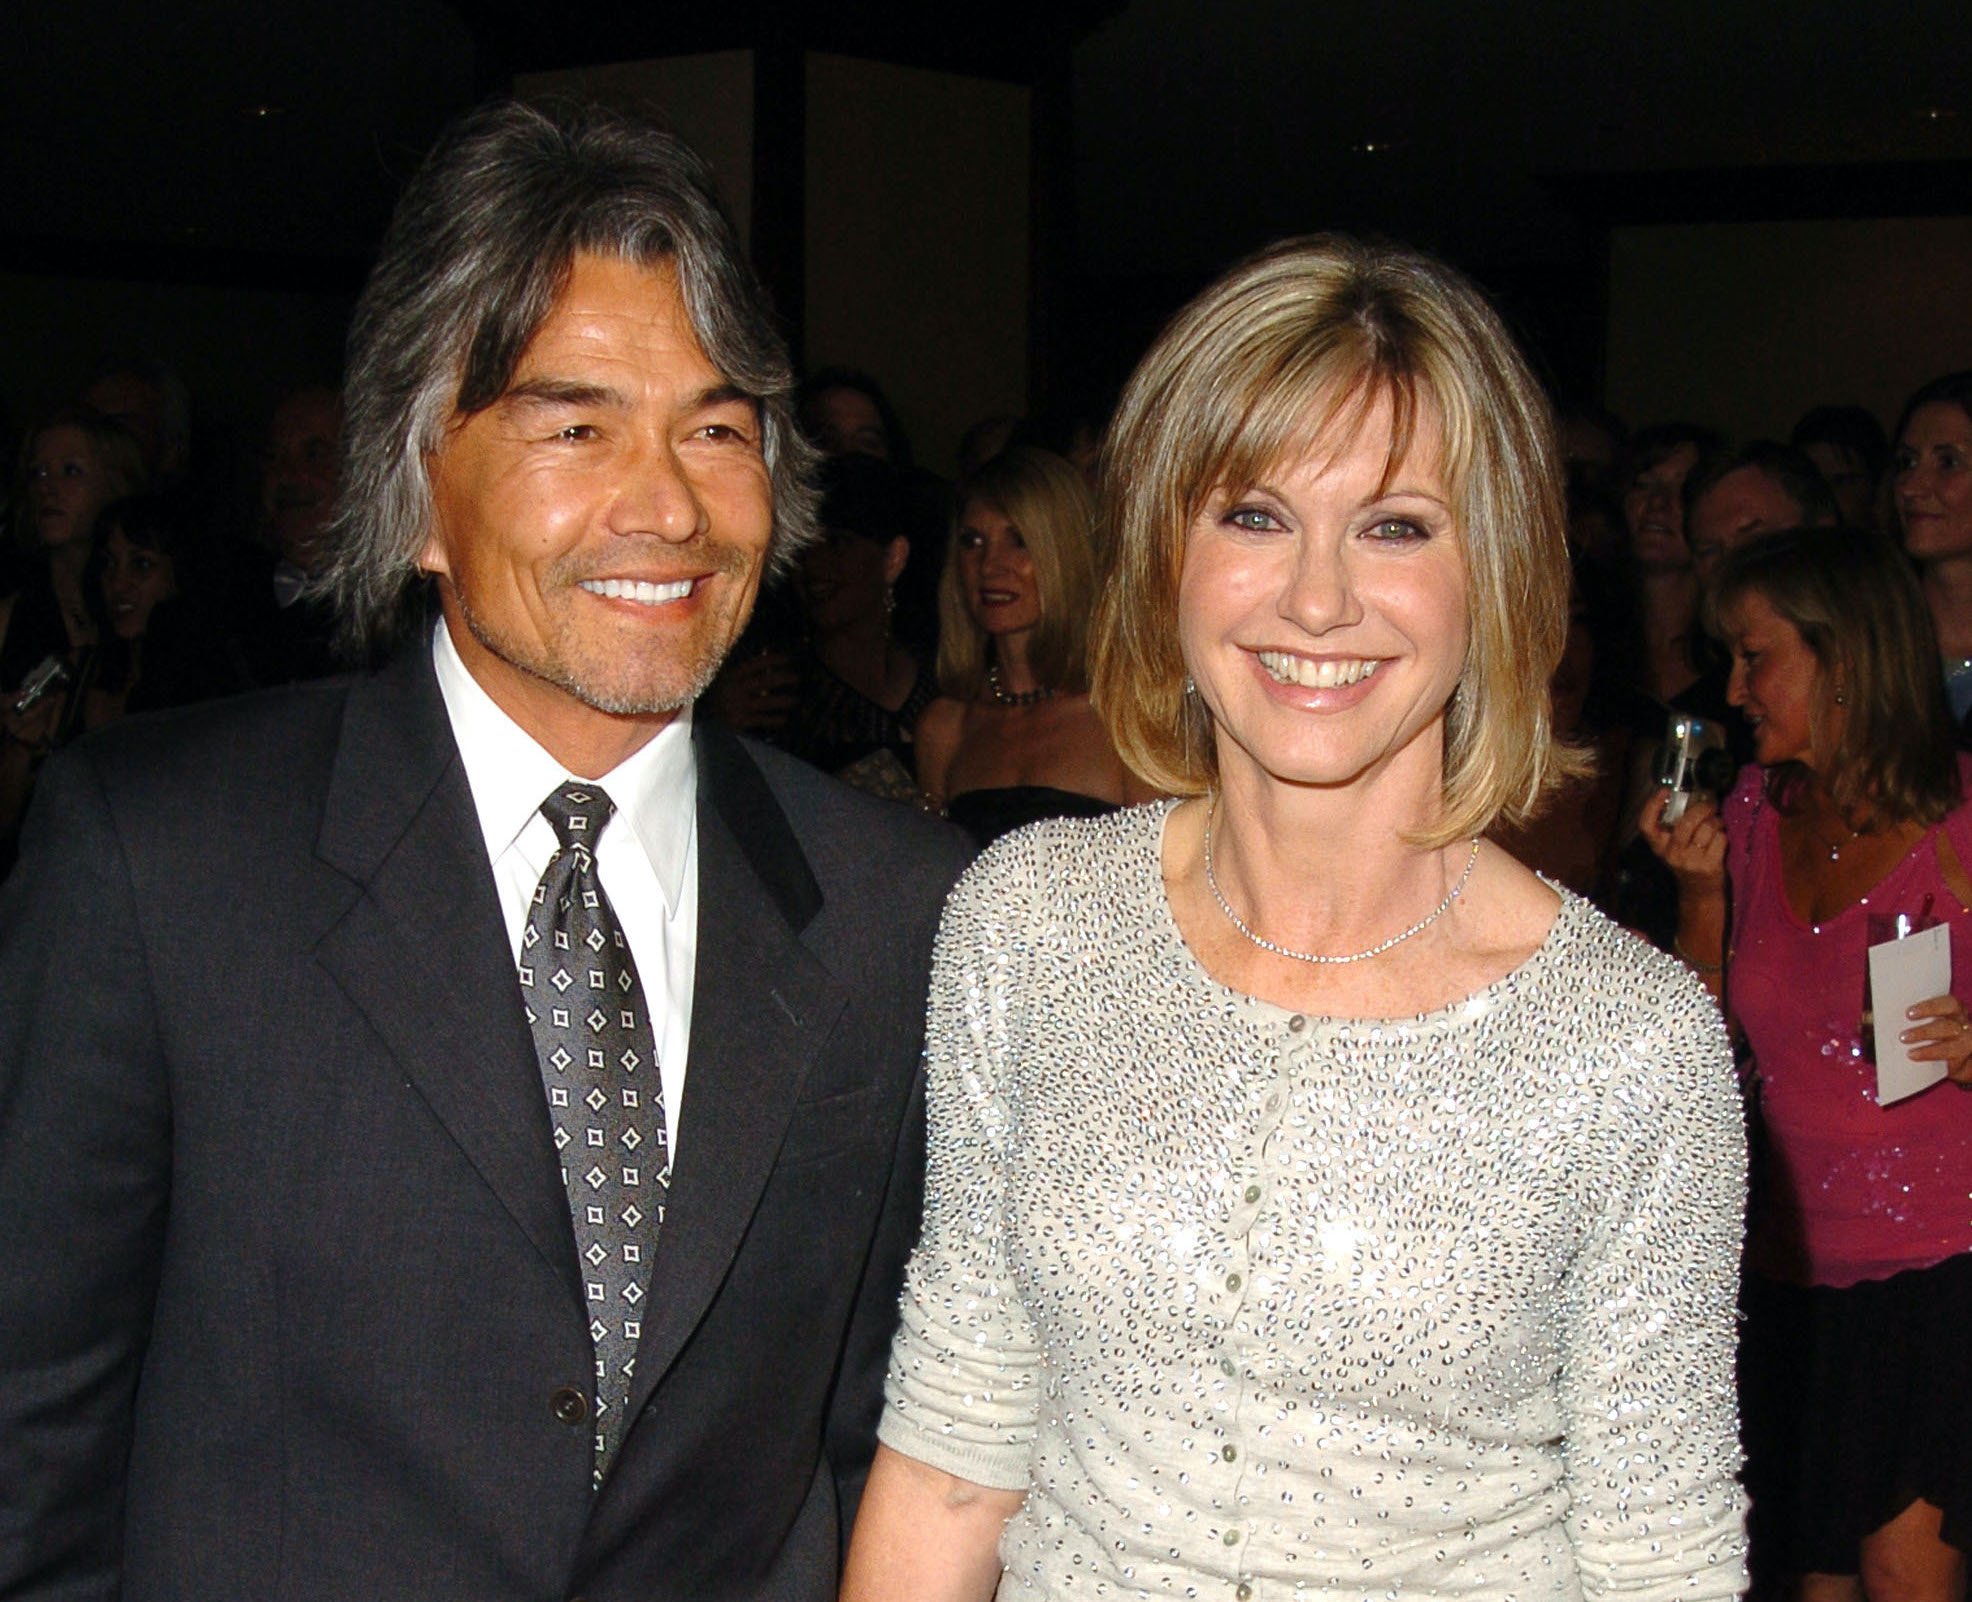 Olivia Newton-John (right) with boyfriend Patrick McDermott in January 2005. Newton-John once said she didn't think she "would ever be at peace" after McDermott's mysterious 2005 disappearance on a fishing trip.